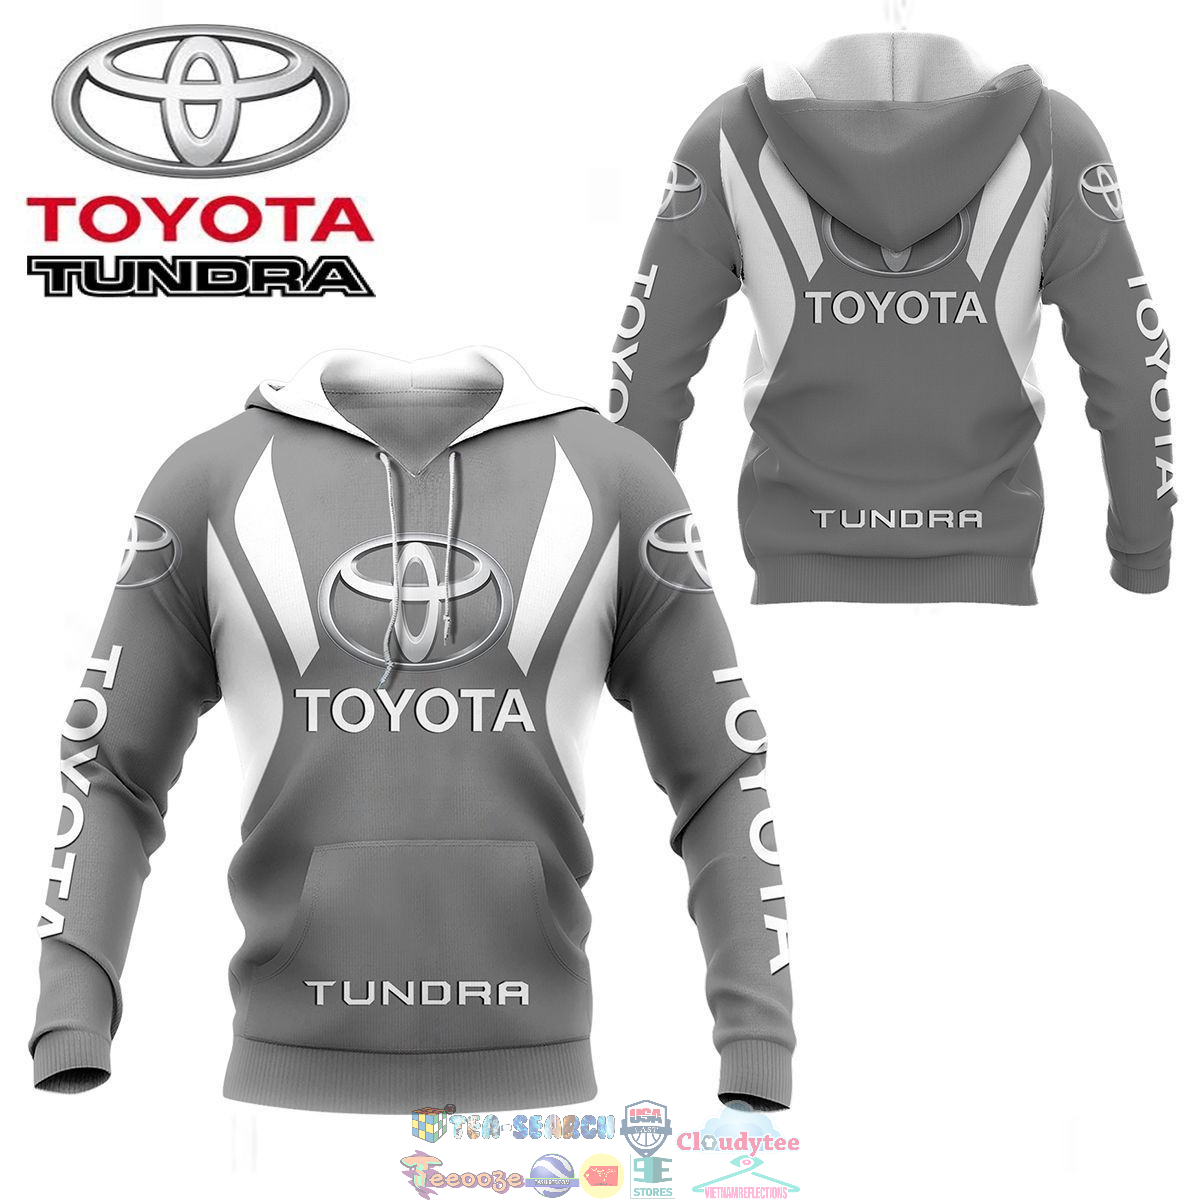 Toyota Tundra ver 21 3D hoodie and t-shirt